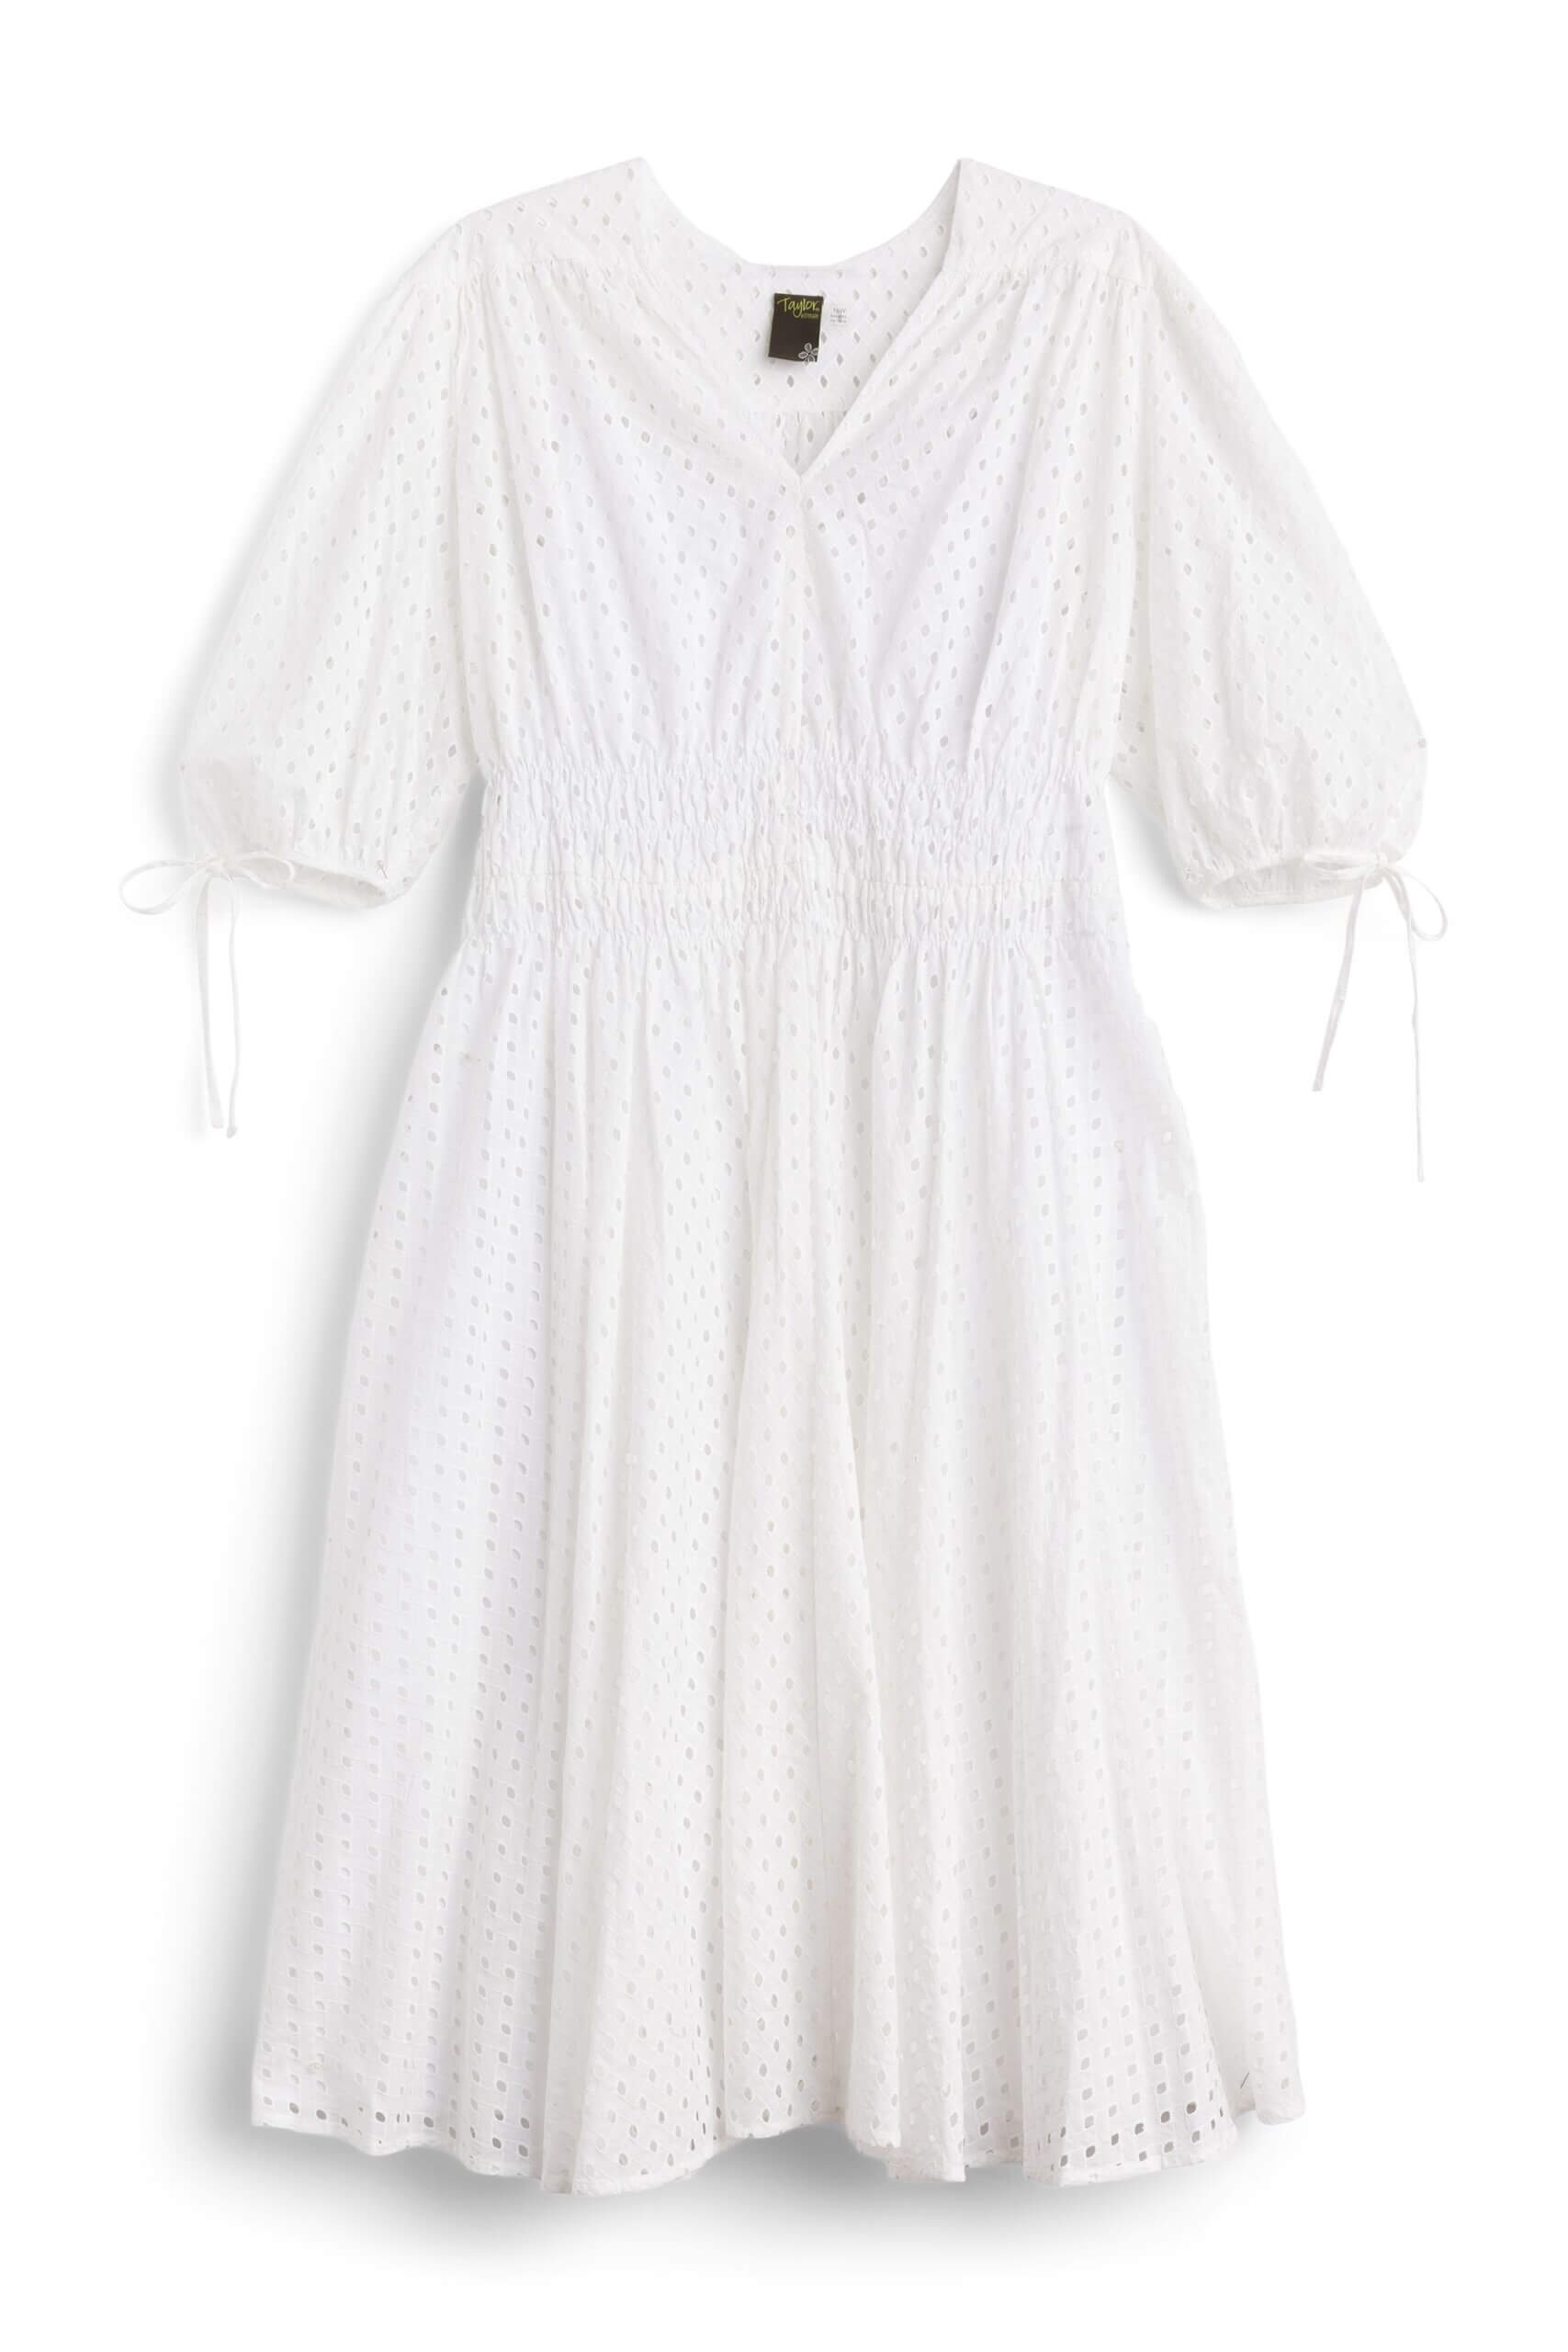 What to Wear with Your Little White Dress Now - FunkyForty